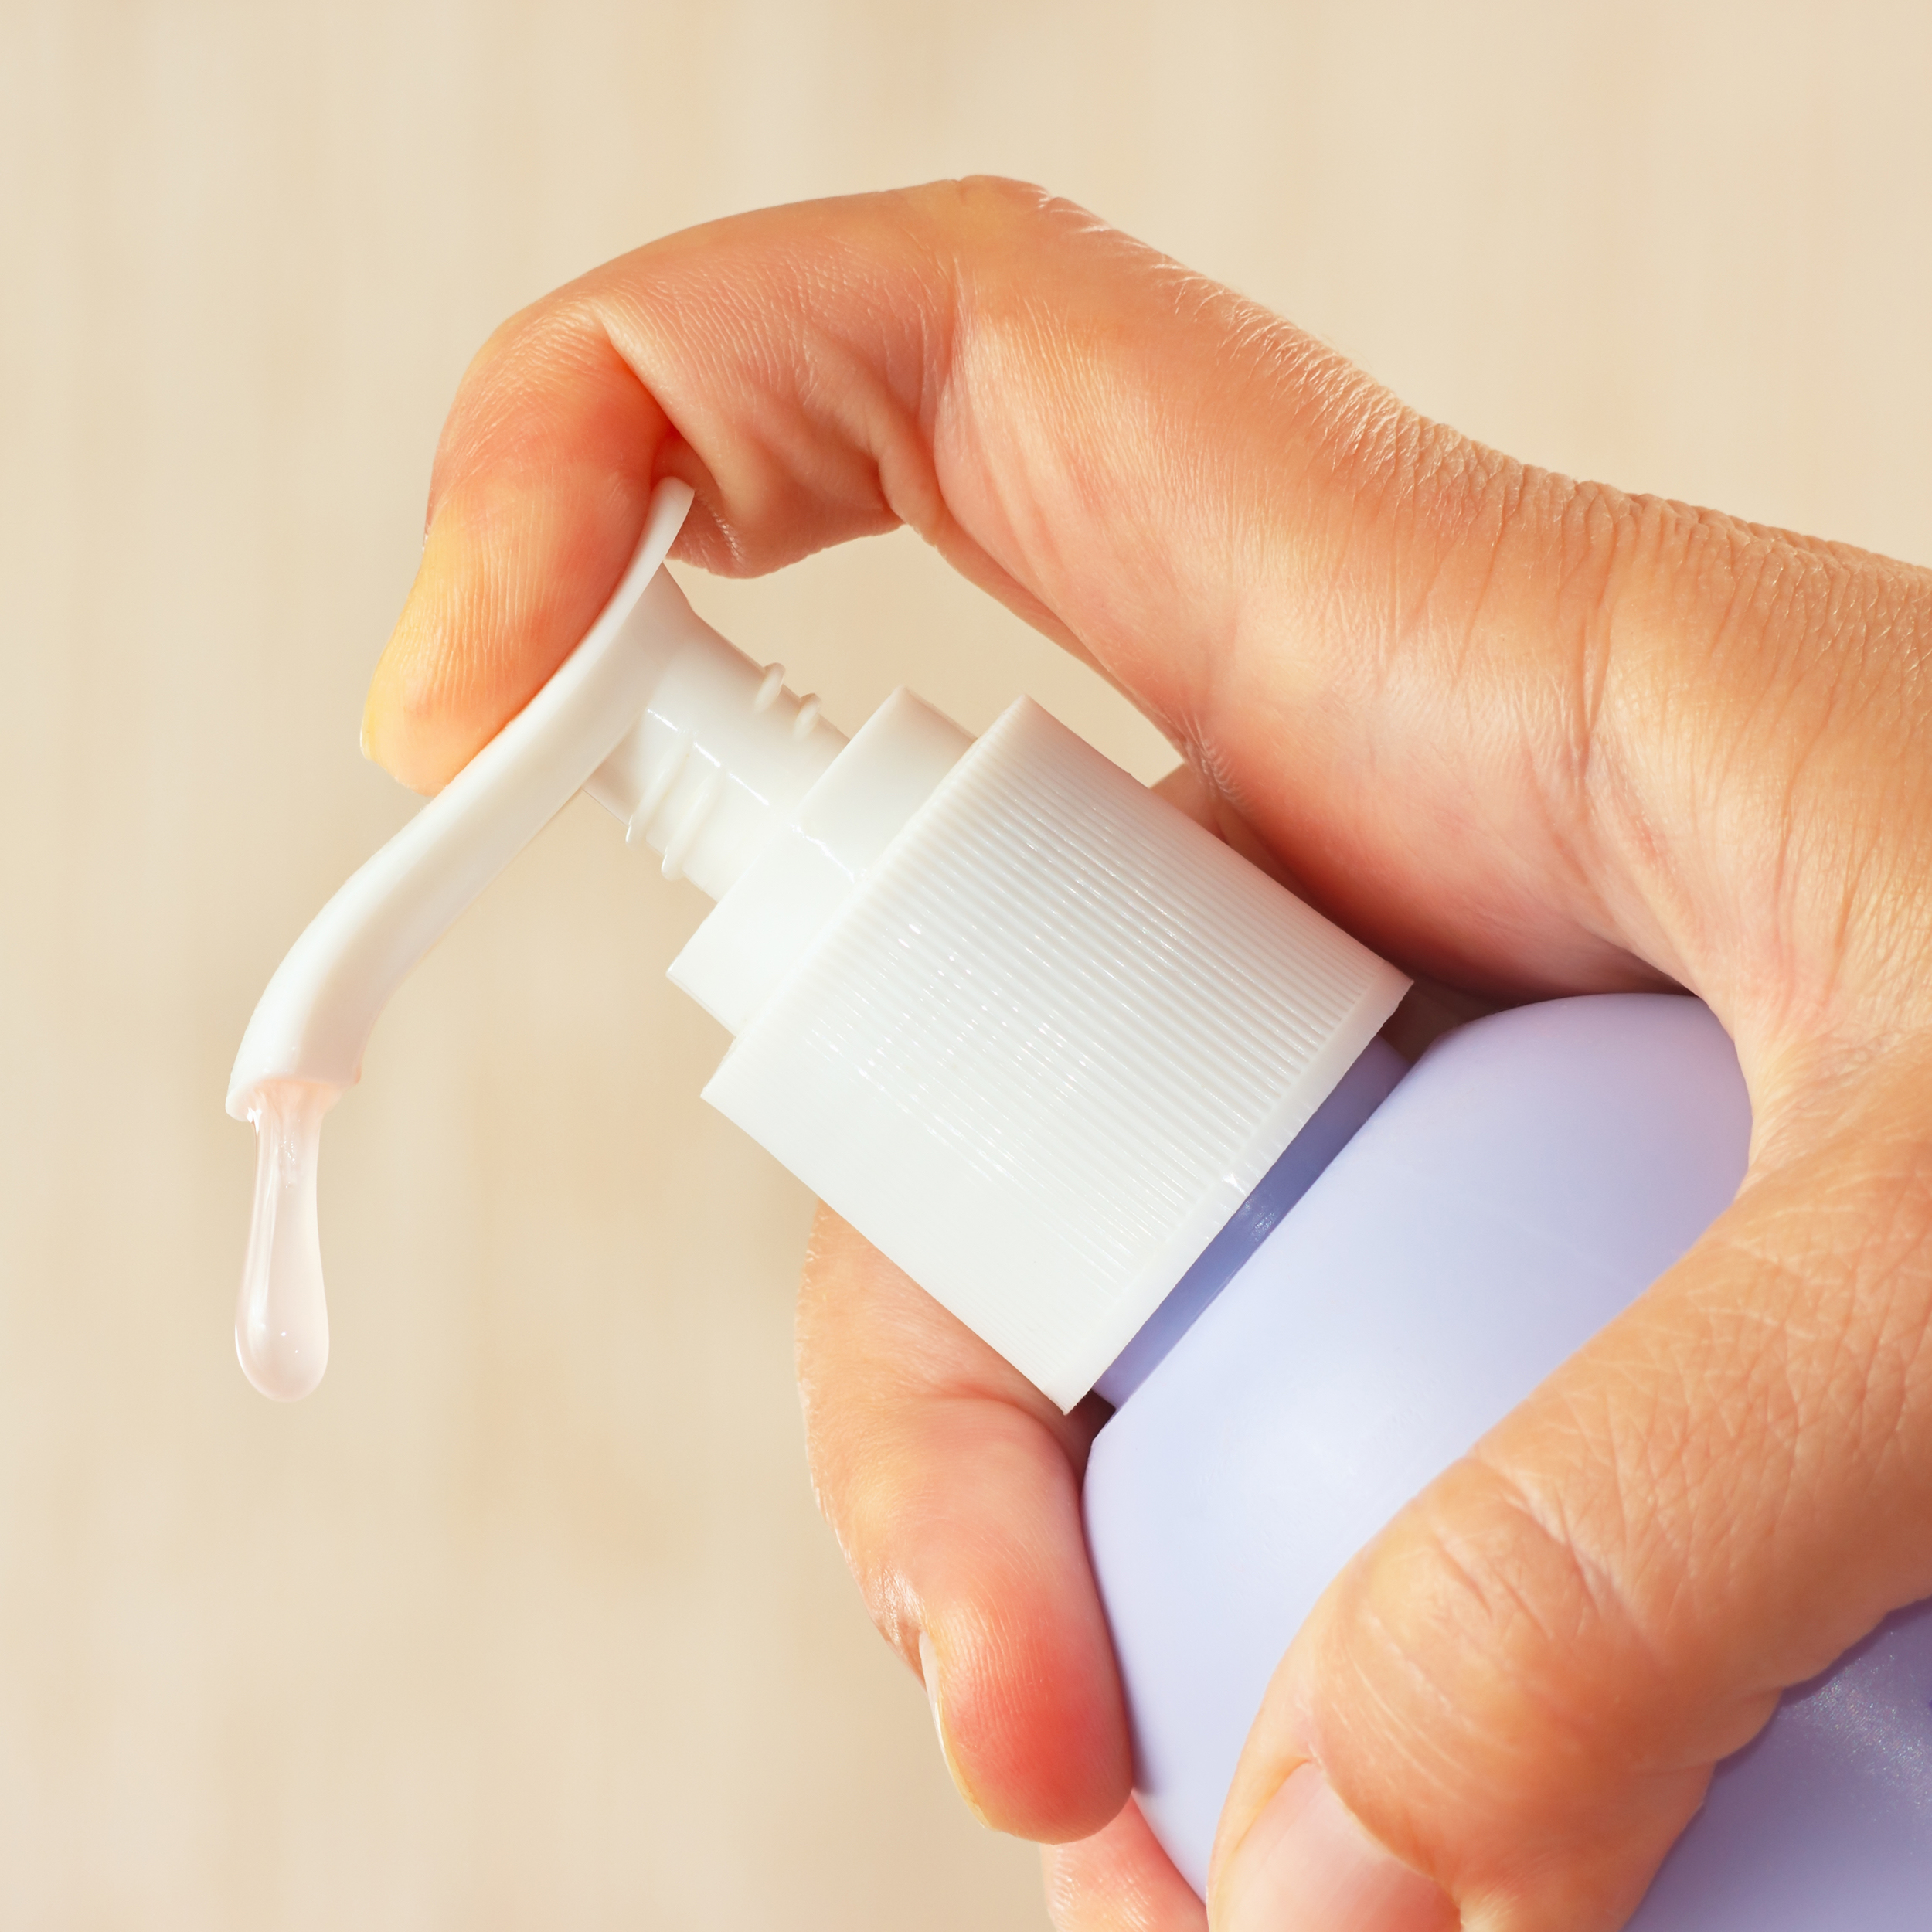 If you use hand sanitizer regularly to clean your hands or protect from germs, think again. 6 hidden dangers of hand sanitizers you don't know about. 